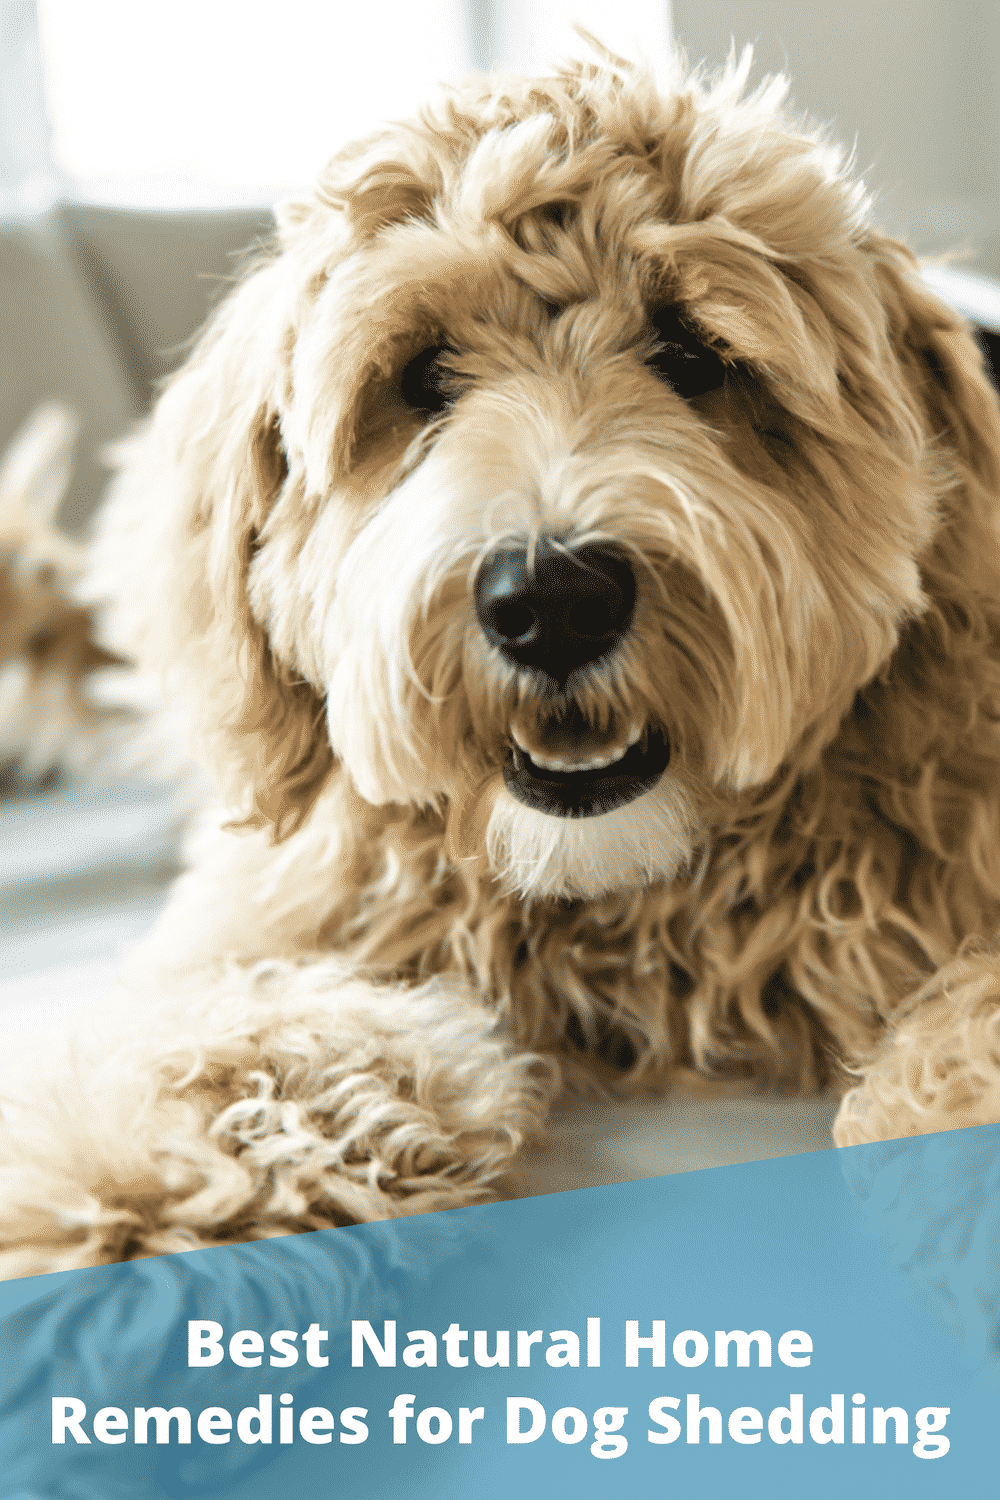 6 Natural Home Remedies for Reducing Dog Shedding